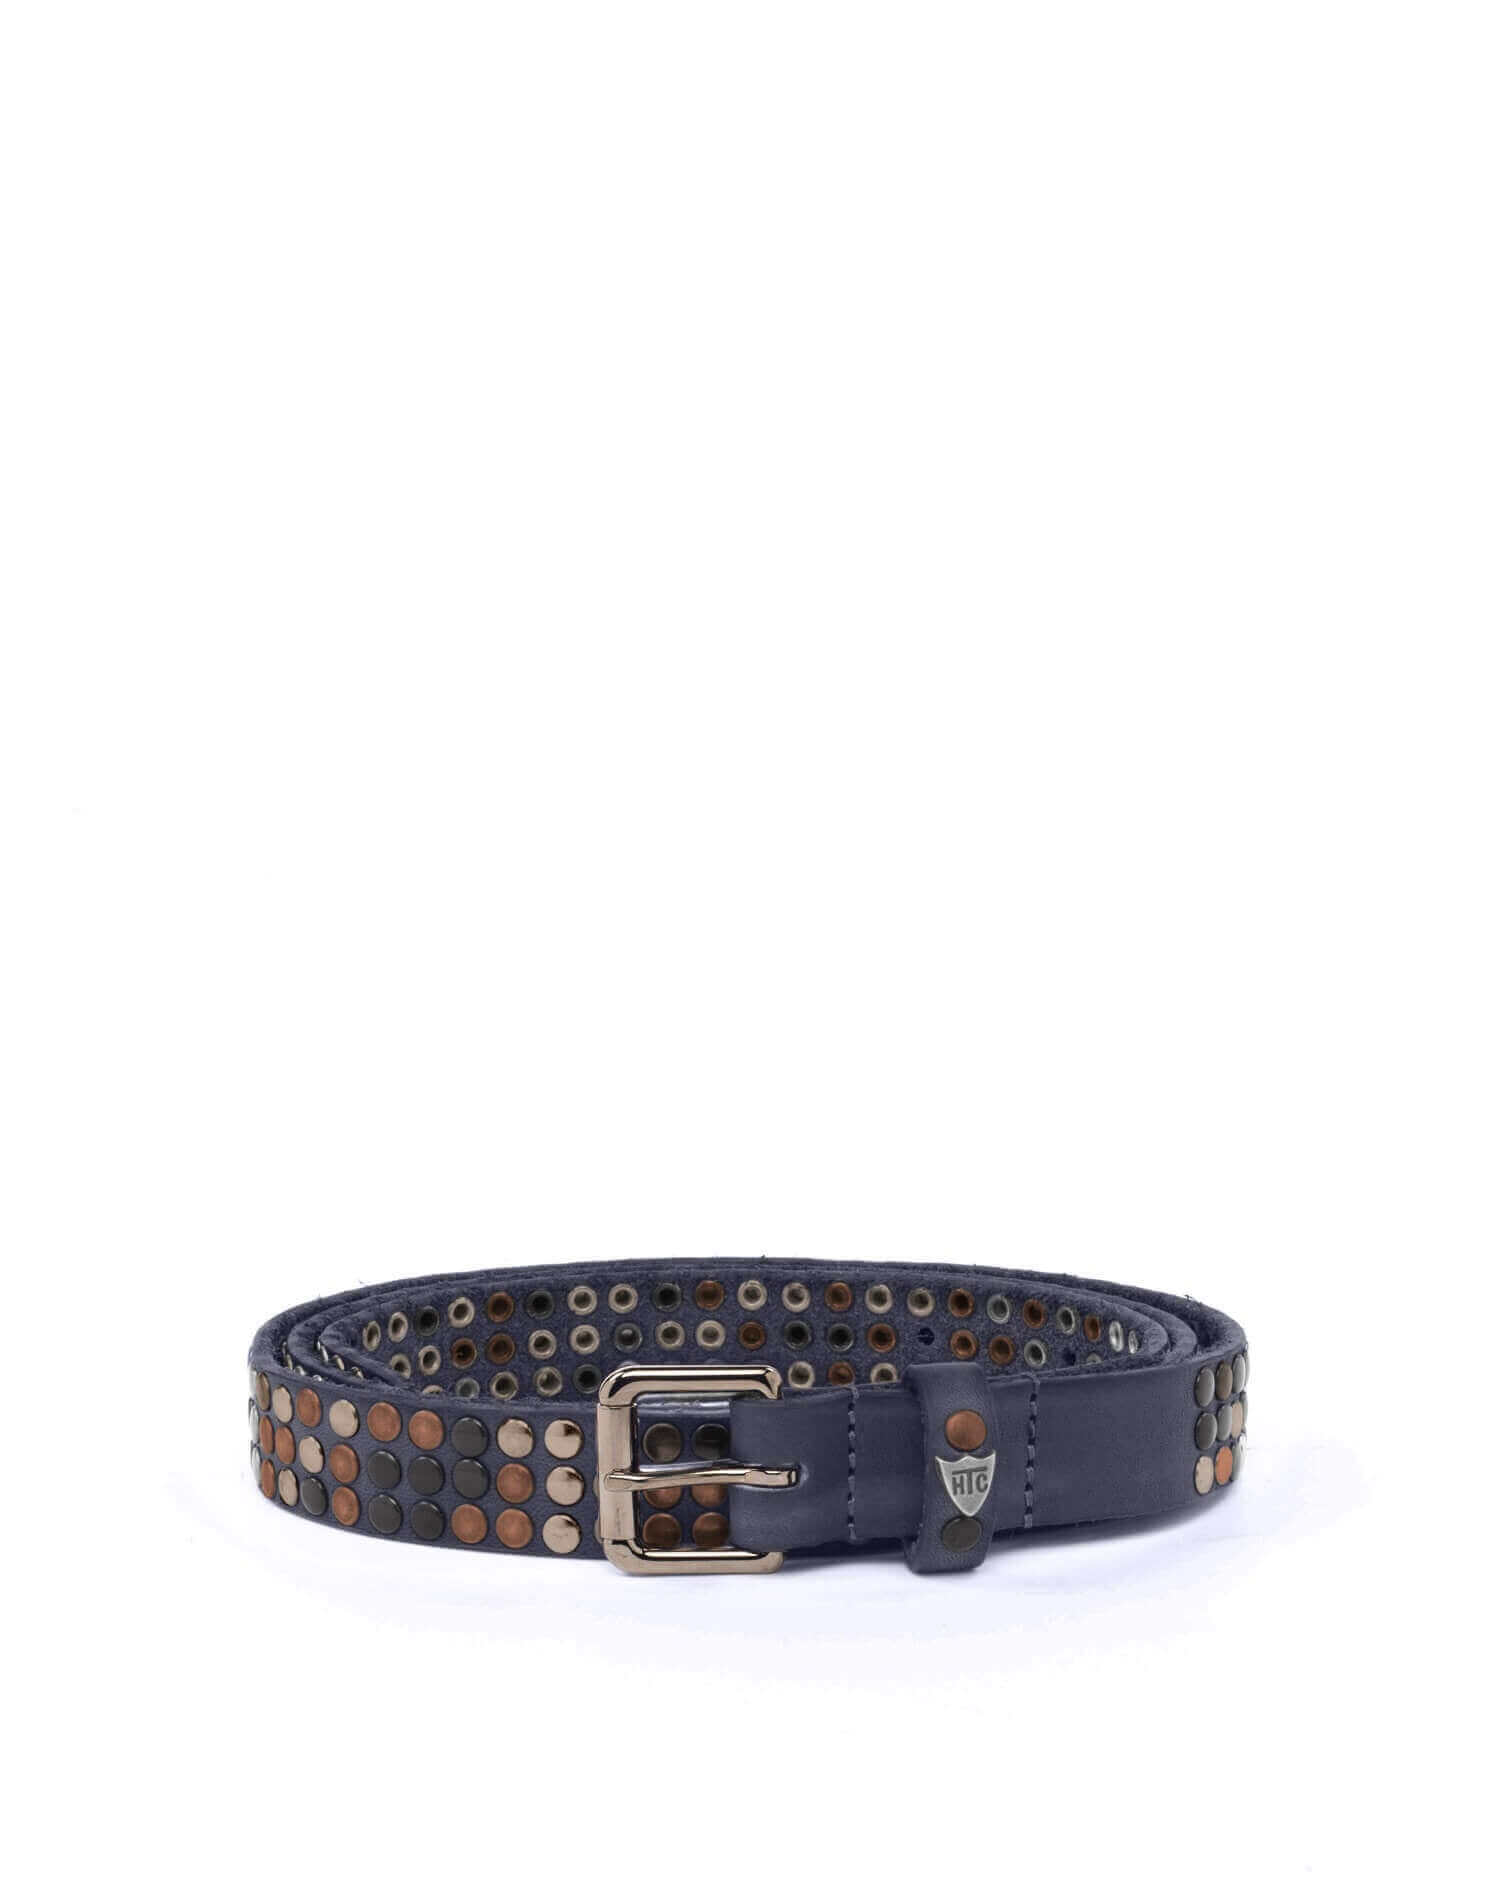 3.000 STUDS COLOR BELT Blue leather belt with studs, brass buckle, studded zamac belt loop and rivet with HTC logo. Height: 2 cm. Made in Italy. HTC LOS ANGELES